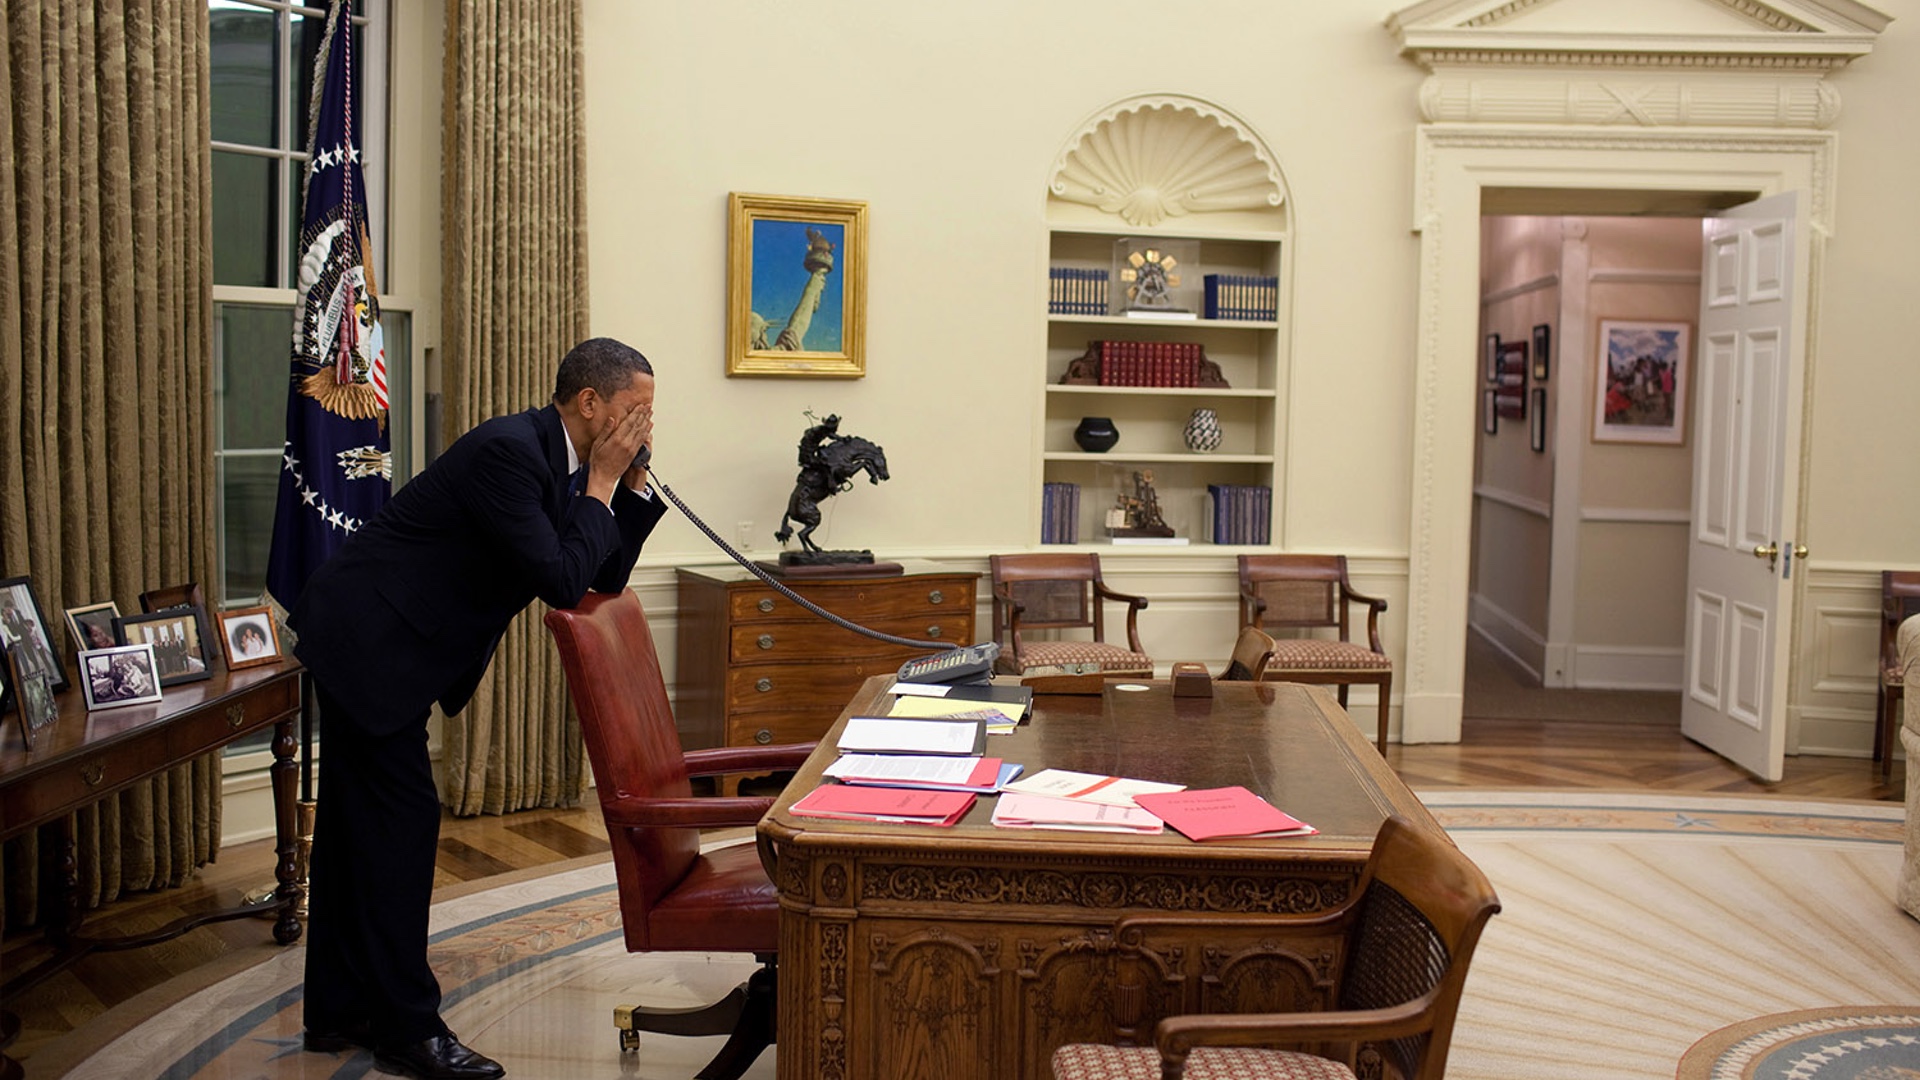 The President on the phone